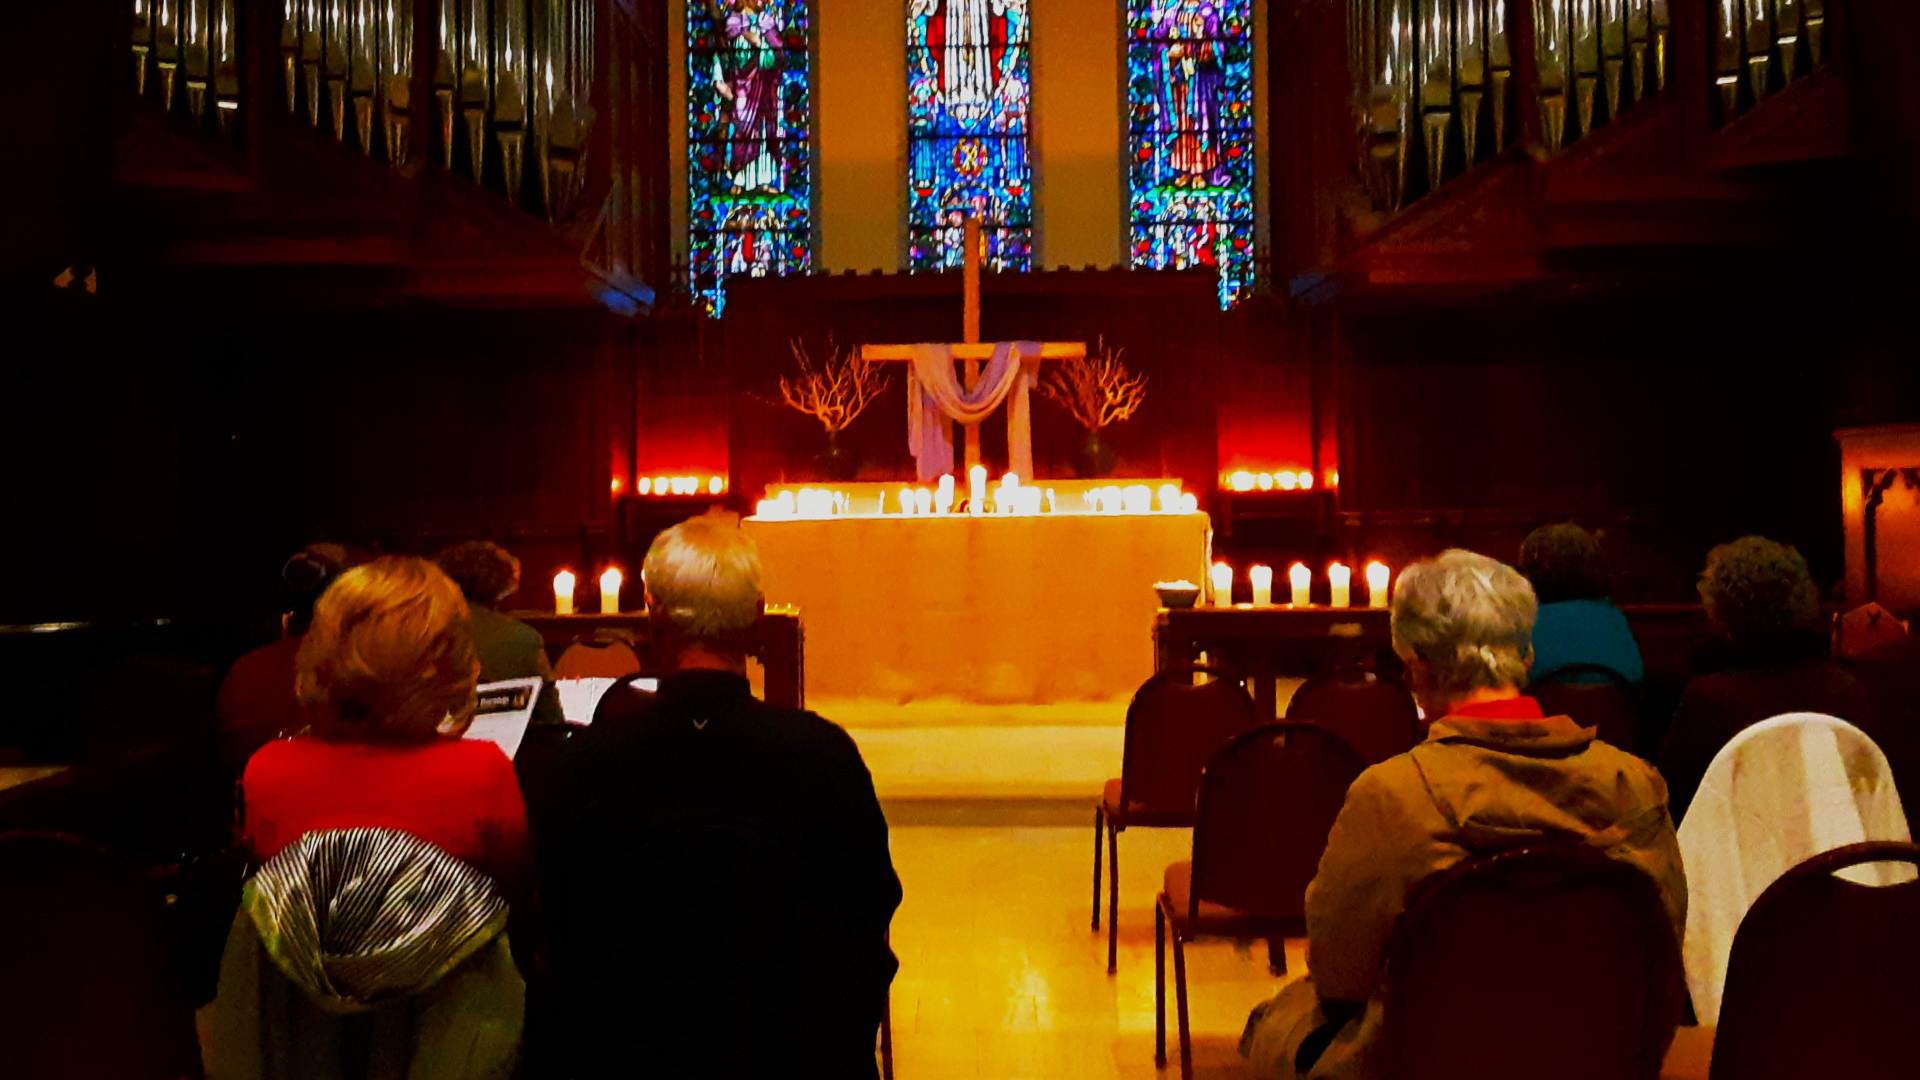 Summer Taizé at St. Andrew’s Episcopal Church